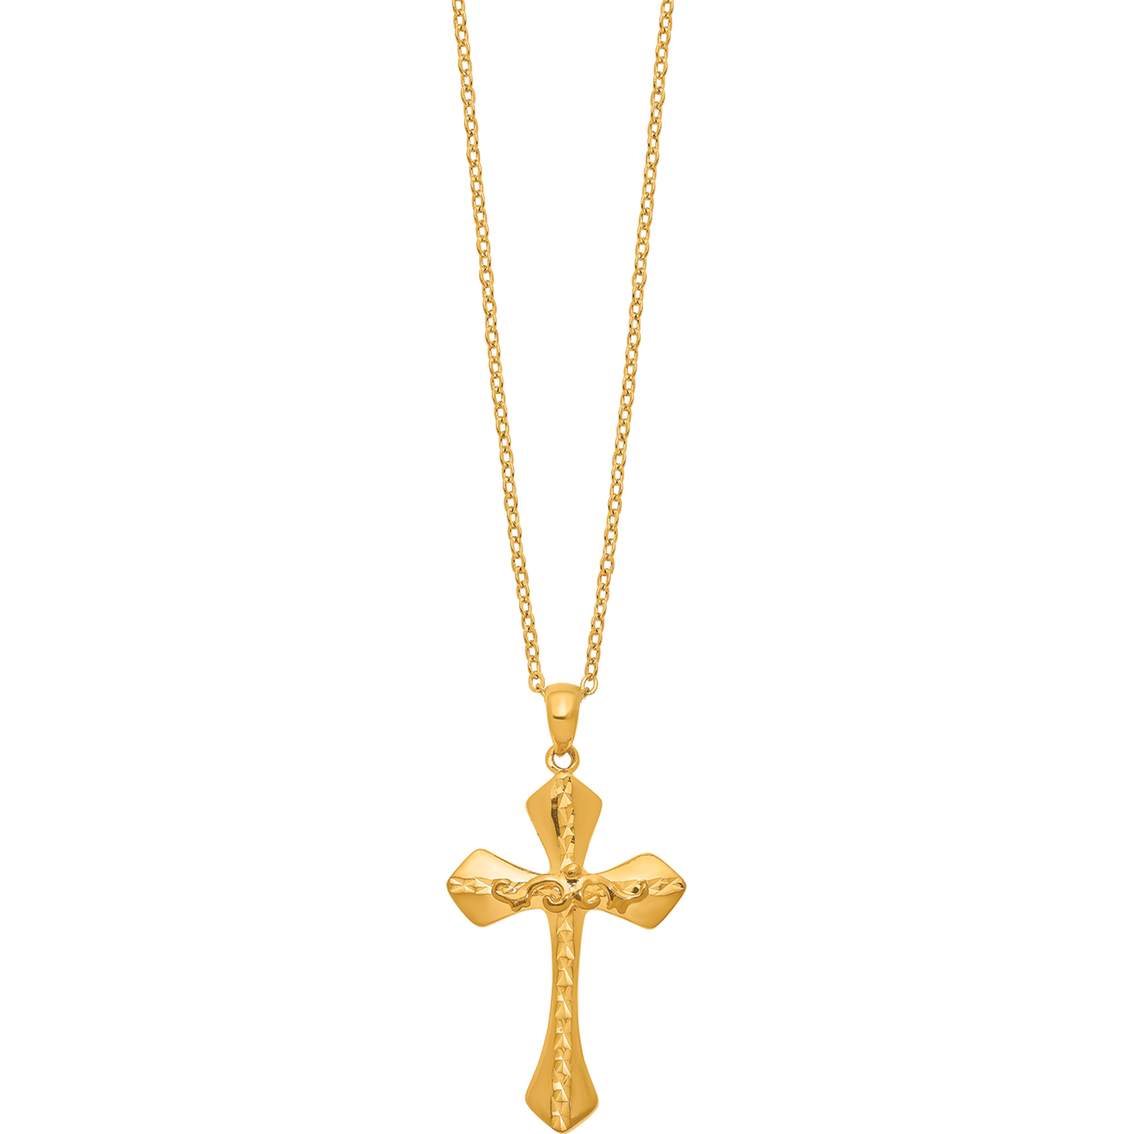 24K Pure Gold 20 in. Fashion Cross Pendant Necklace - Image 2 of 7